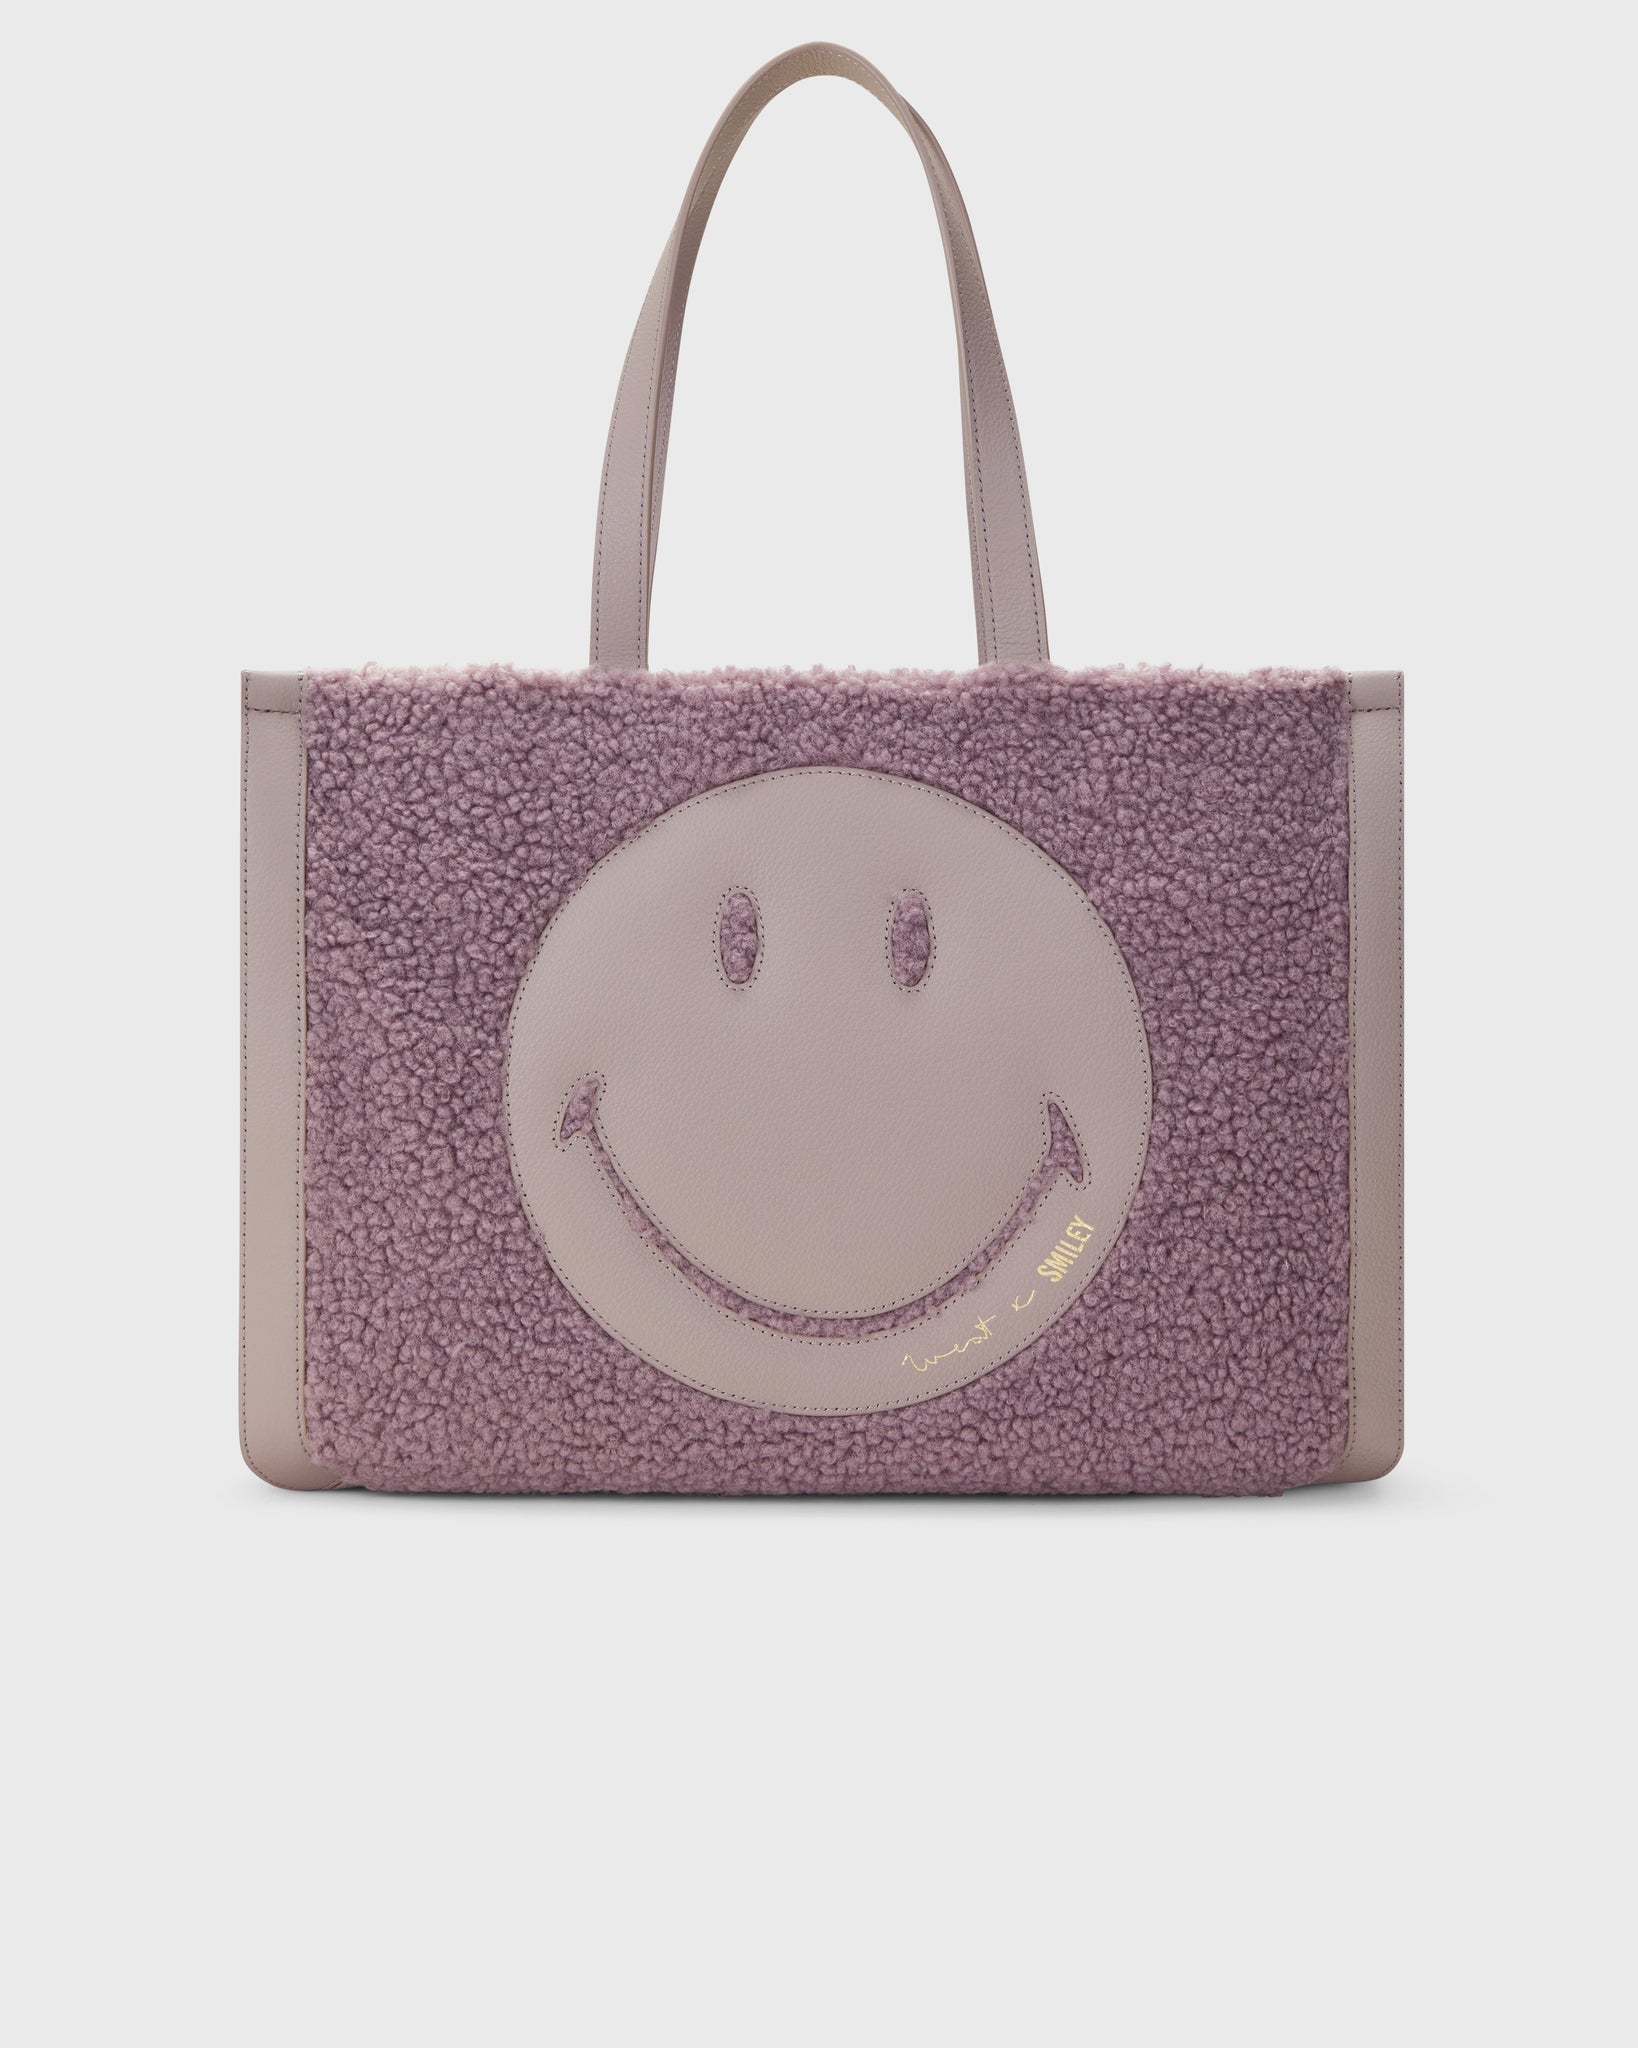 Smiley Face Tote Bag